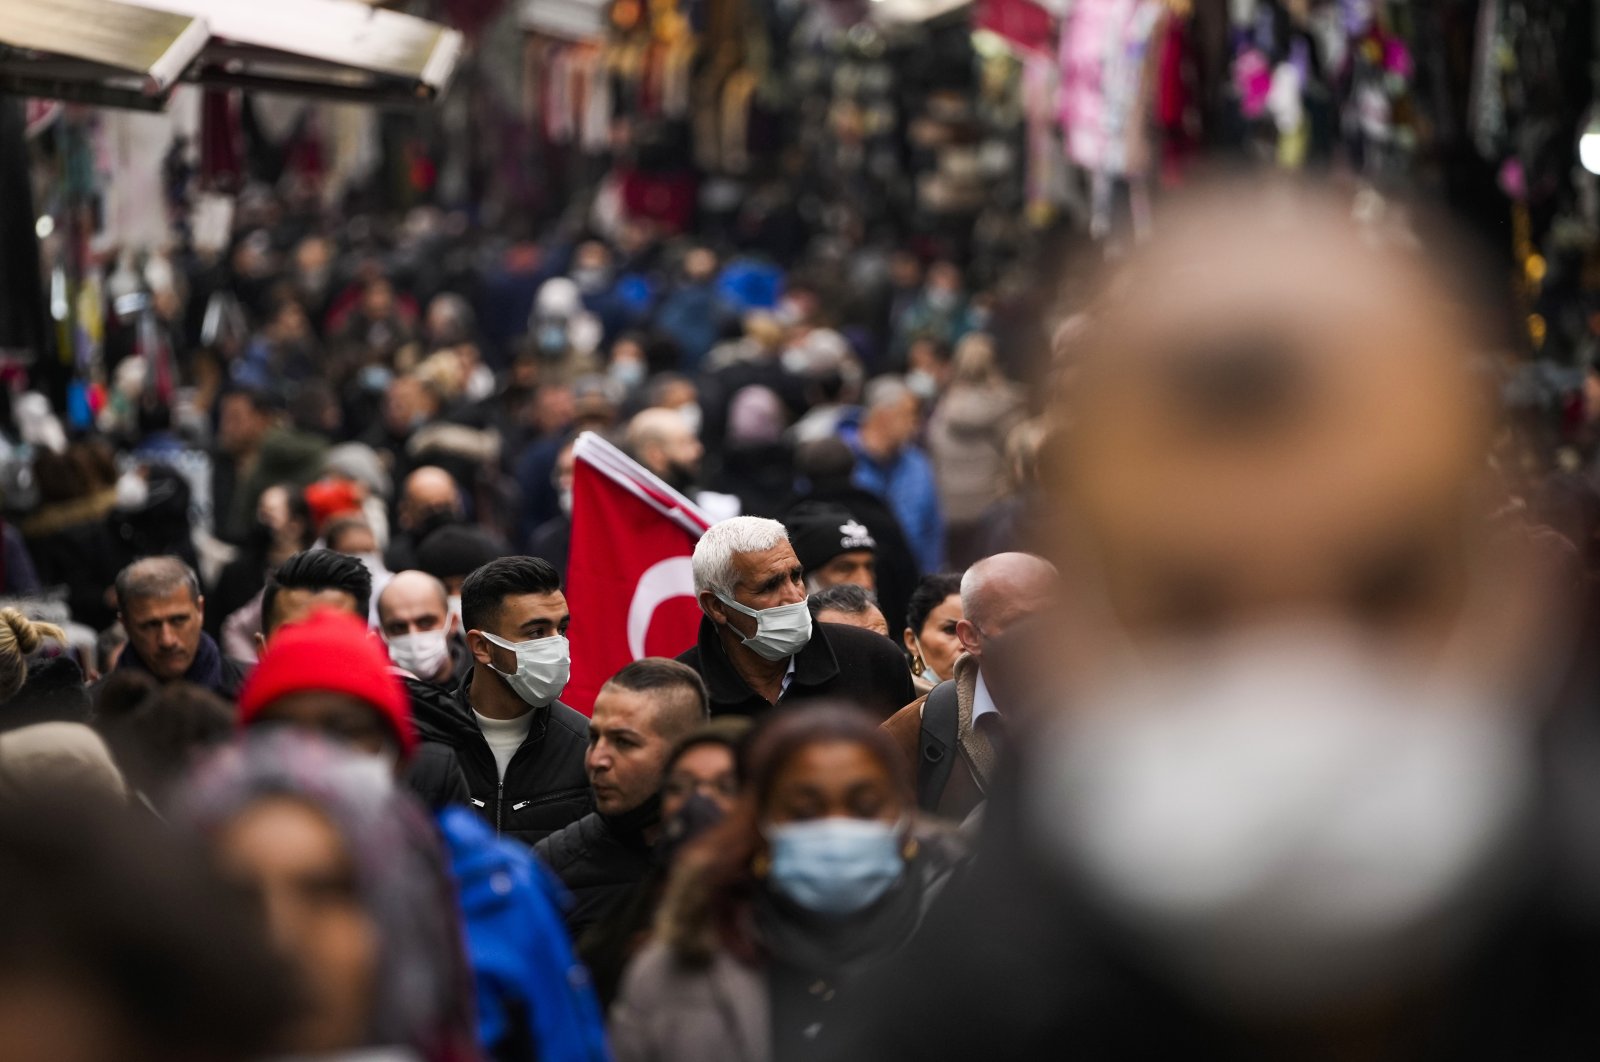 Pedestrians, some wearing protective face masks to prevent the spread of the COVID-19, walk in a street market, Istanbul, Turkey, Dec. 31, 2021. (AP Photo)